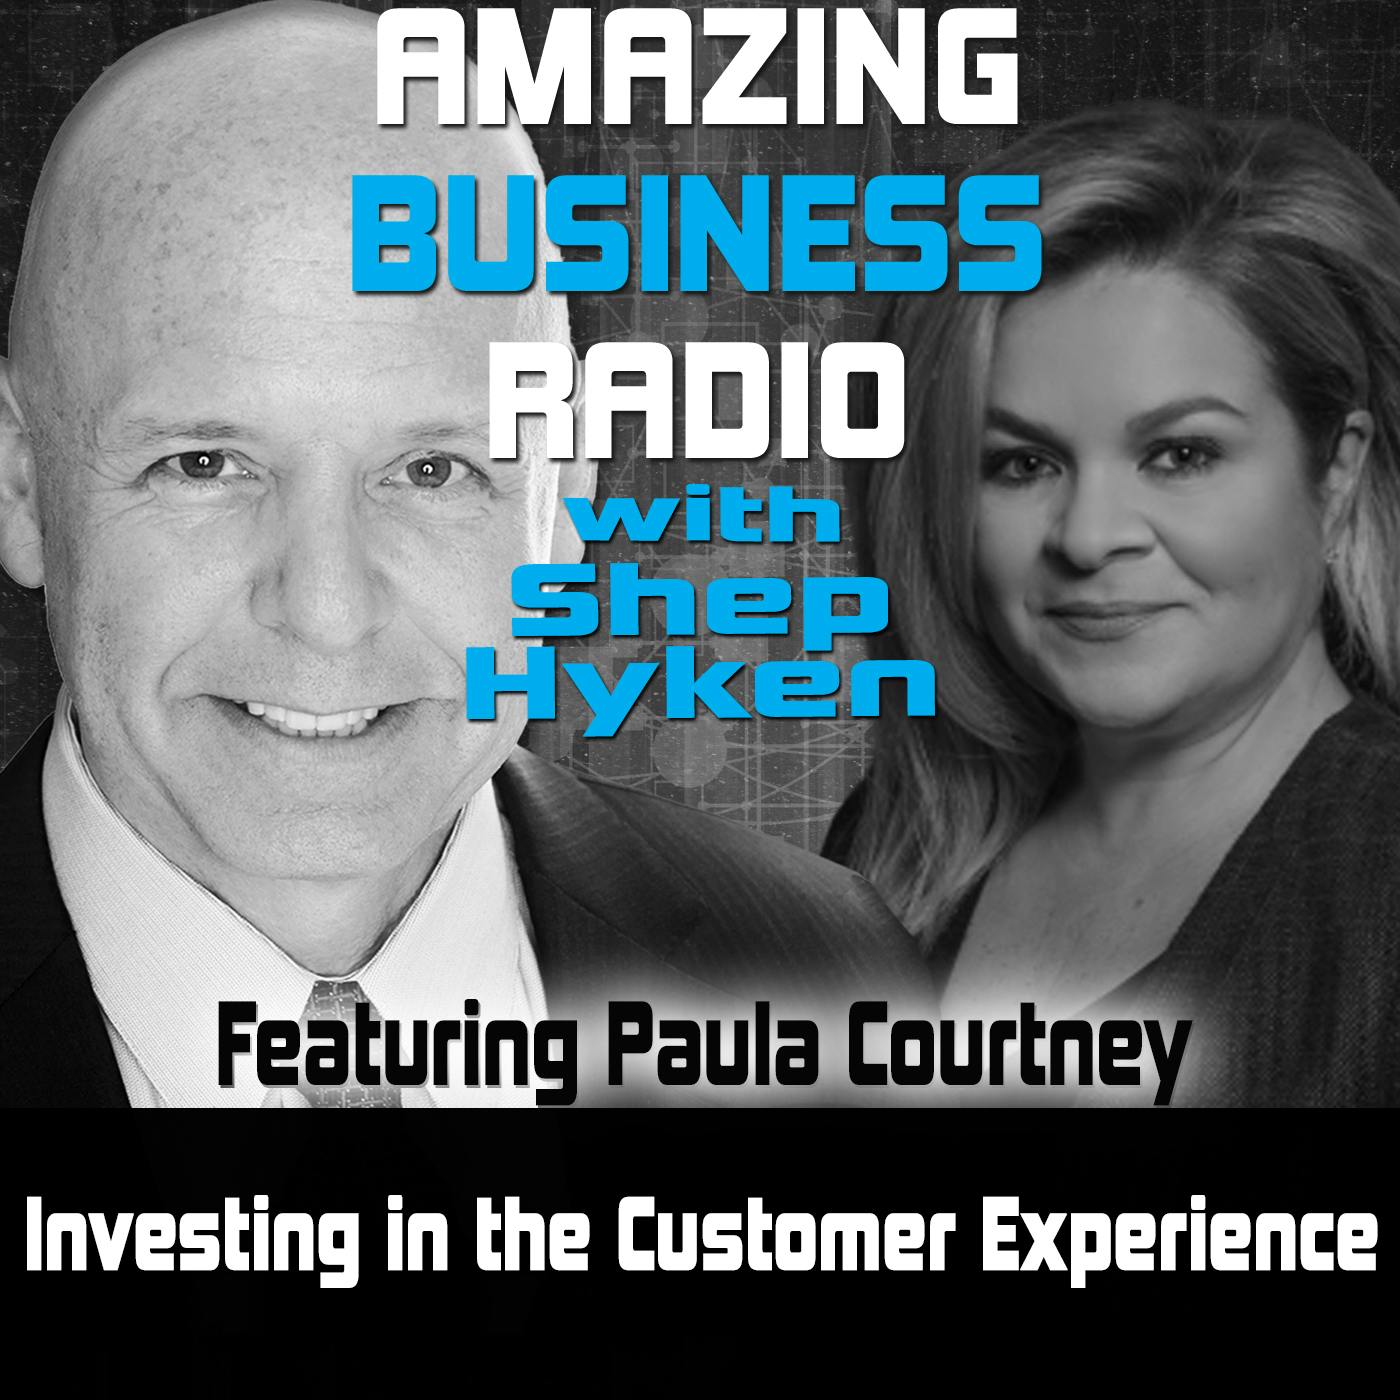 Investing in the Customer Experience Featuring Paula Courtney